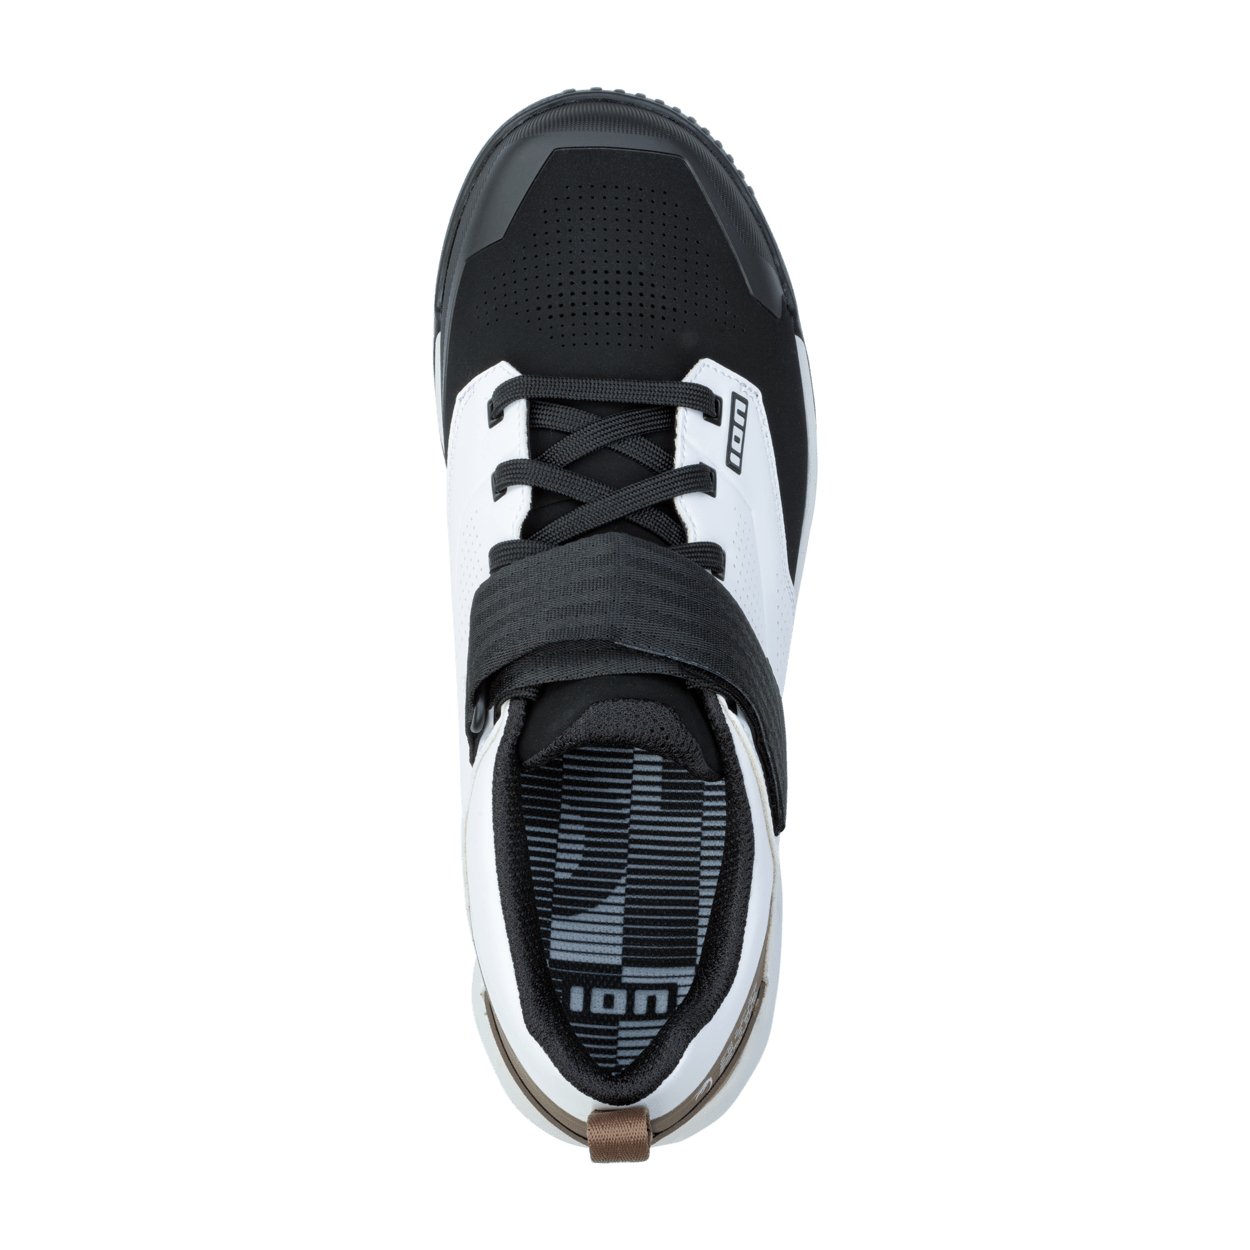 ION MTB Clipless Shoes Rascal Amp 2024 - Worthing Watersports - 9008415966752 - Footwear - ION Bike